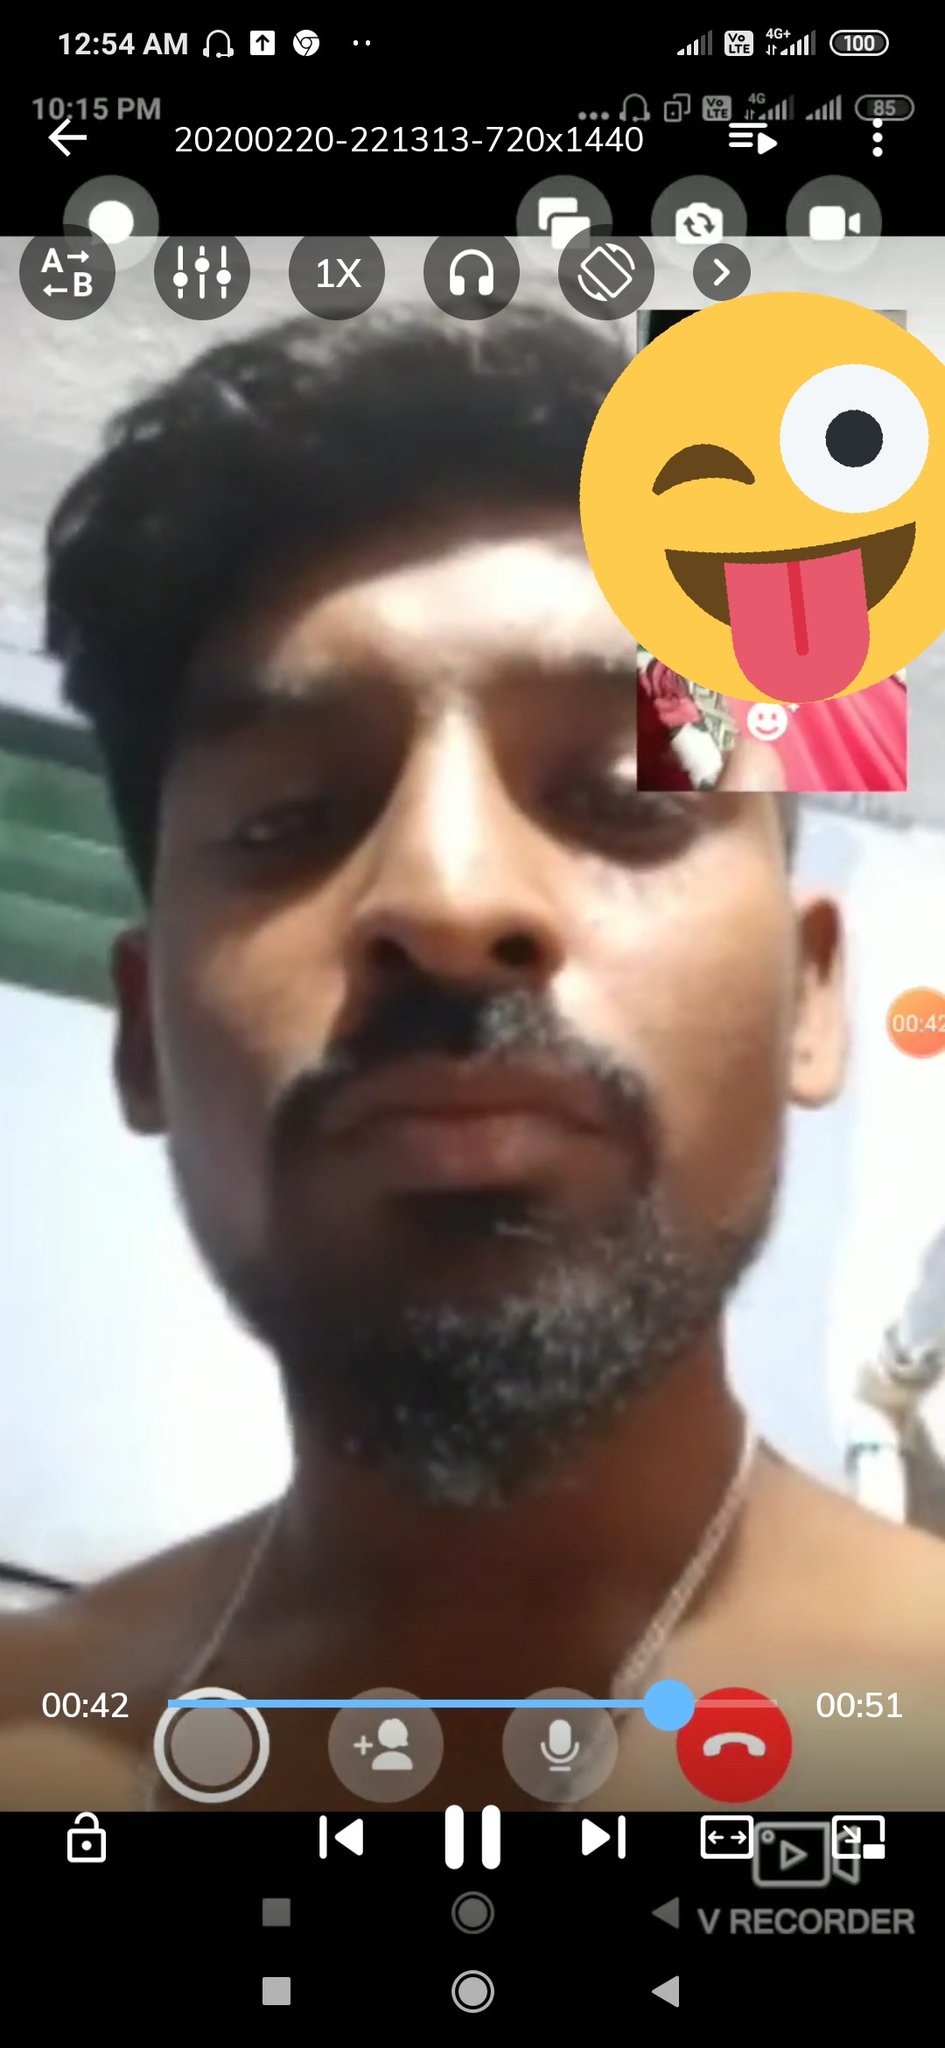 Hot boys sex videocall record I have only paid on X: Anyone wants his video  whatsapp me 9597431566 only paid service other don't distrup  t.coimenfBjoMZ  X